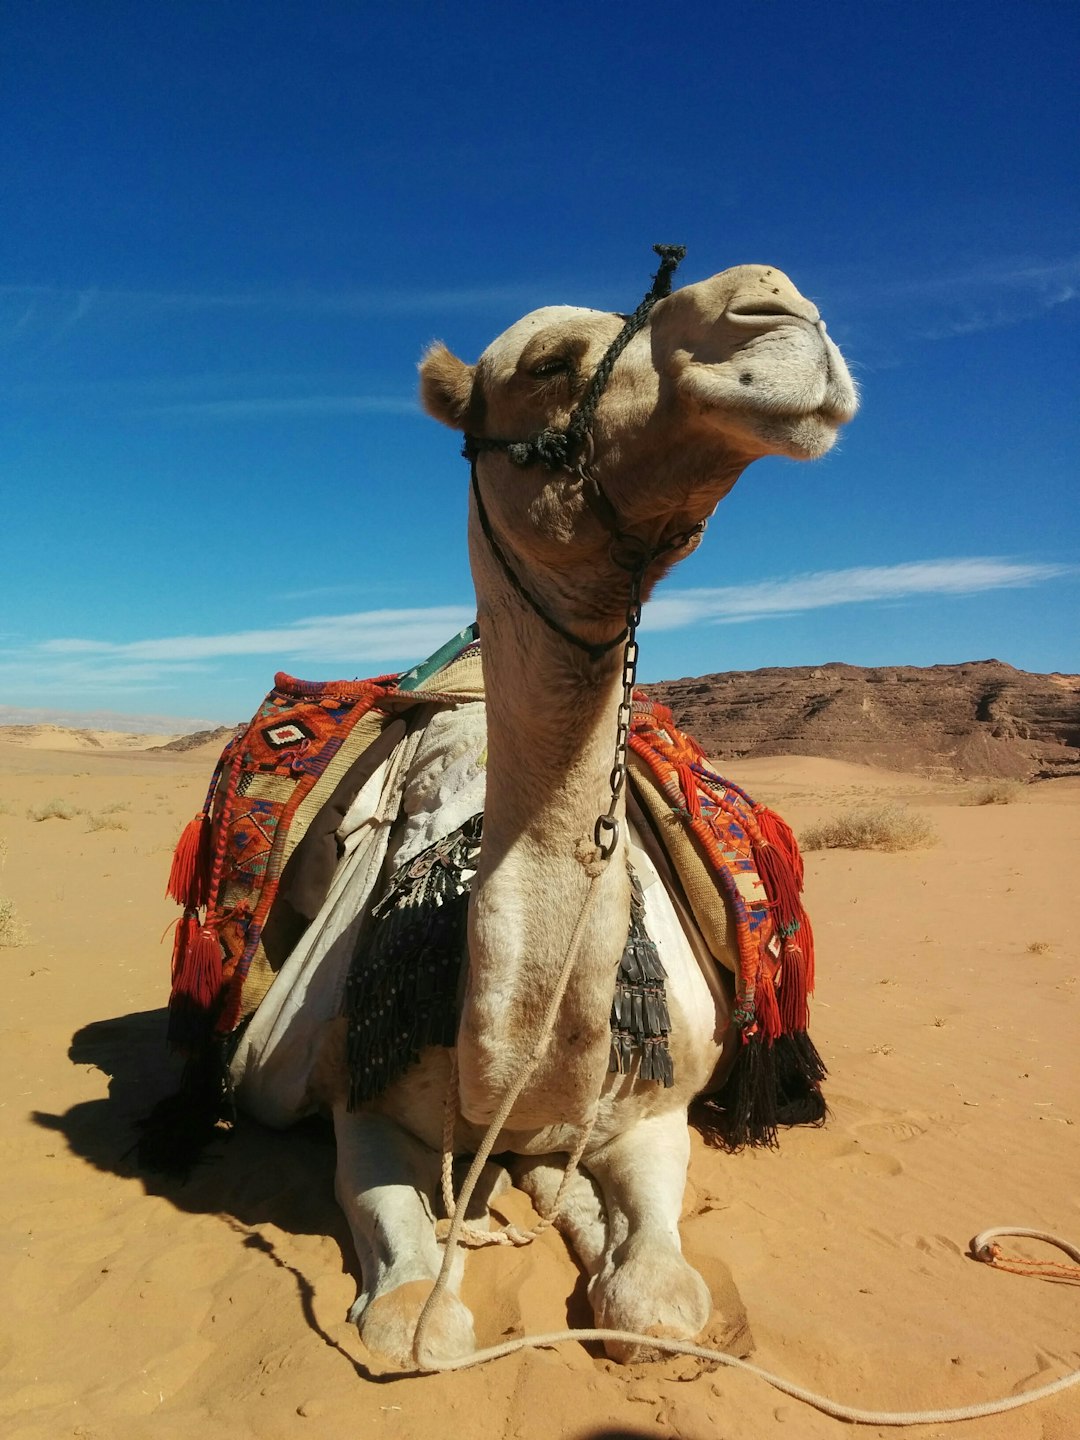 travelers stories about Desert in South Sinai, Egypt